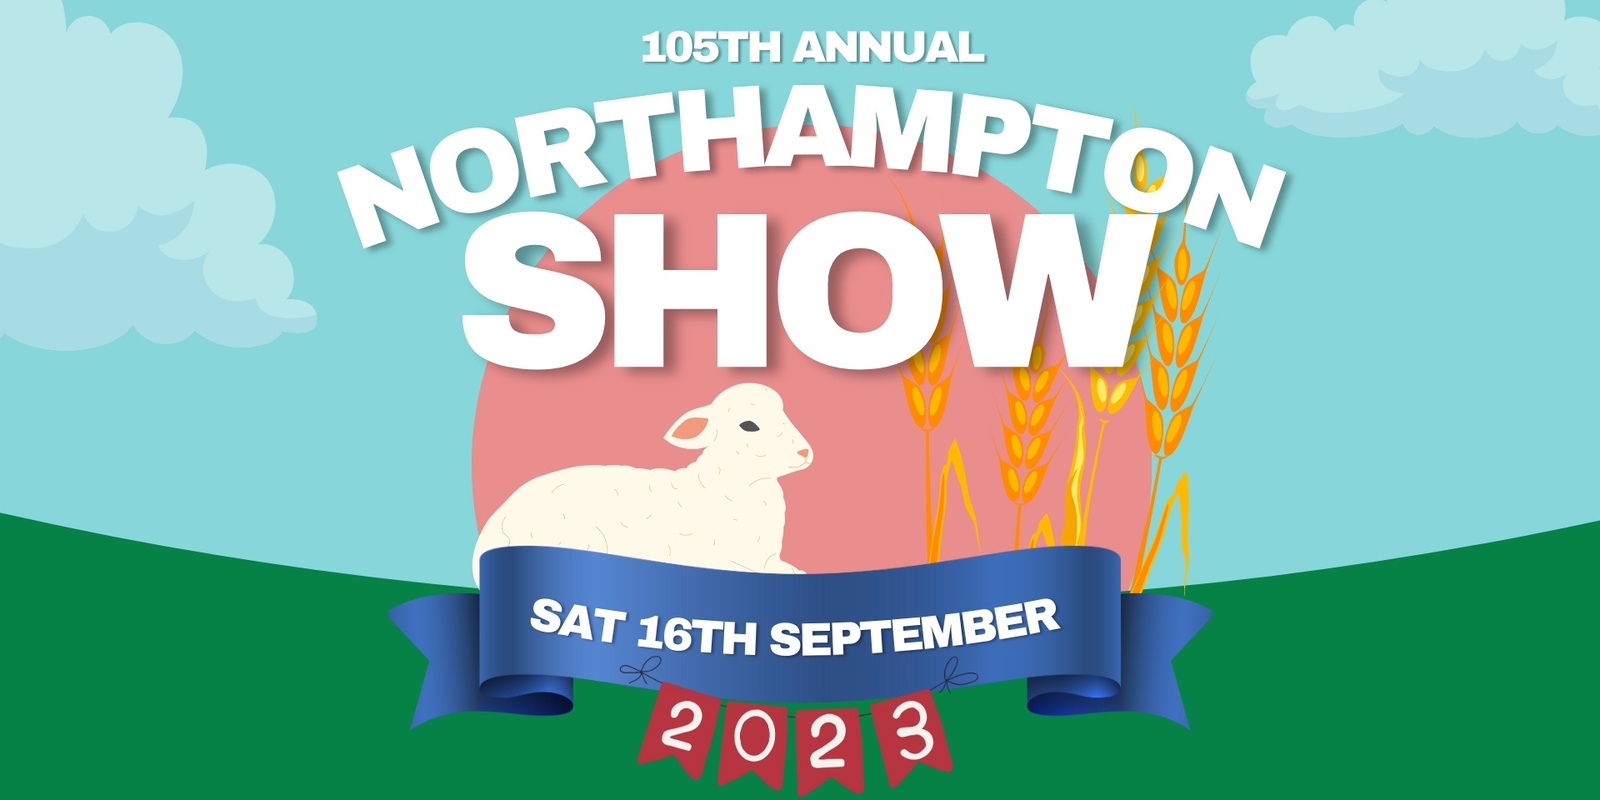 Banner image for 105th Annual Northampton Show